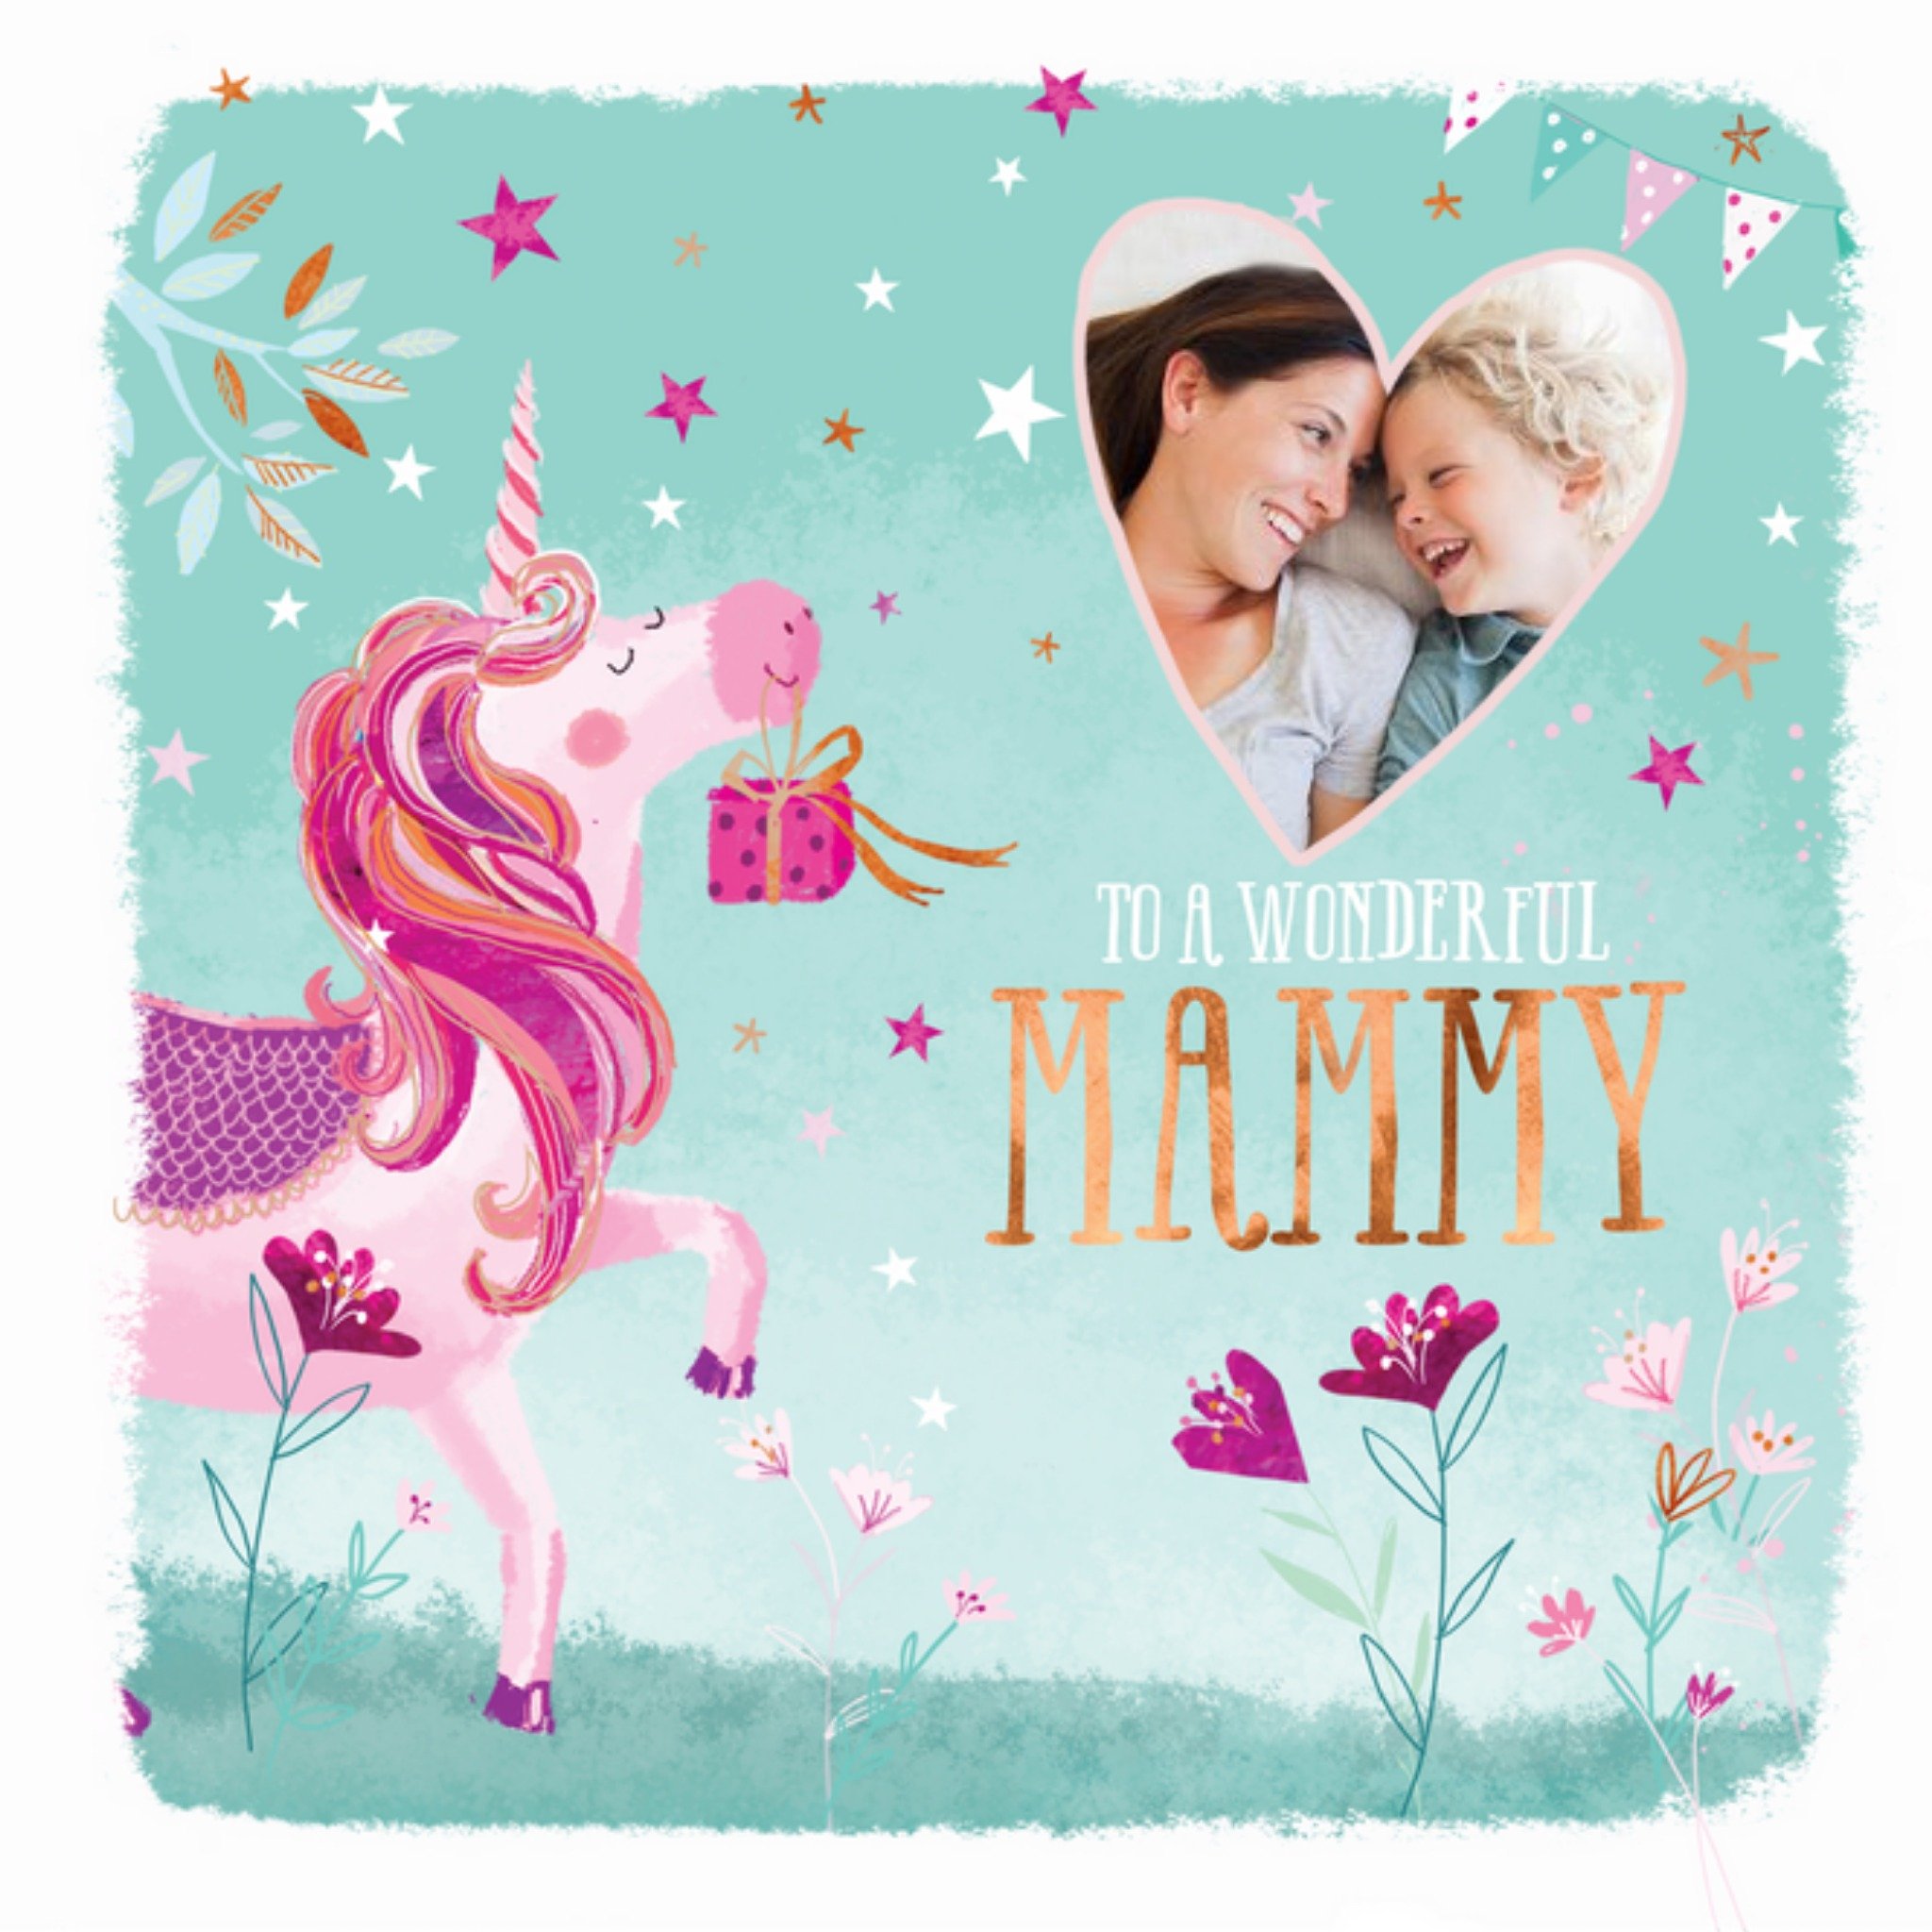 Ling Design Unicorn To A Wonderful Mammy Photo Mother's Day Card, Square